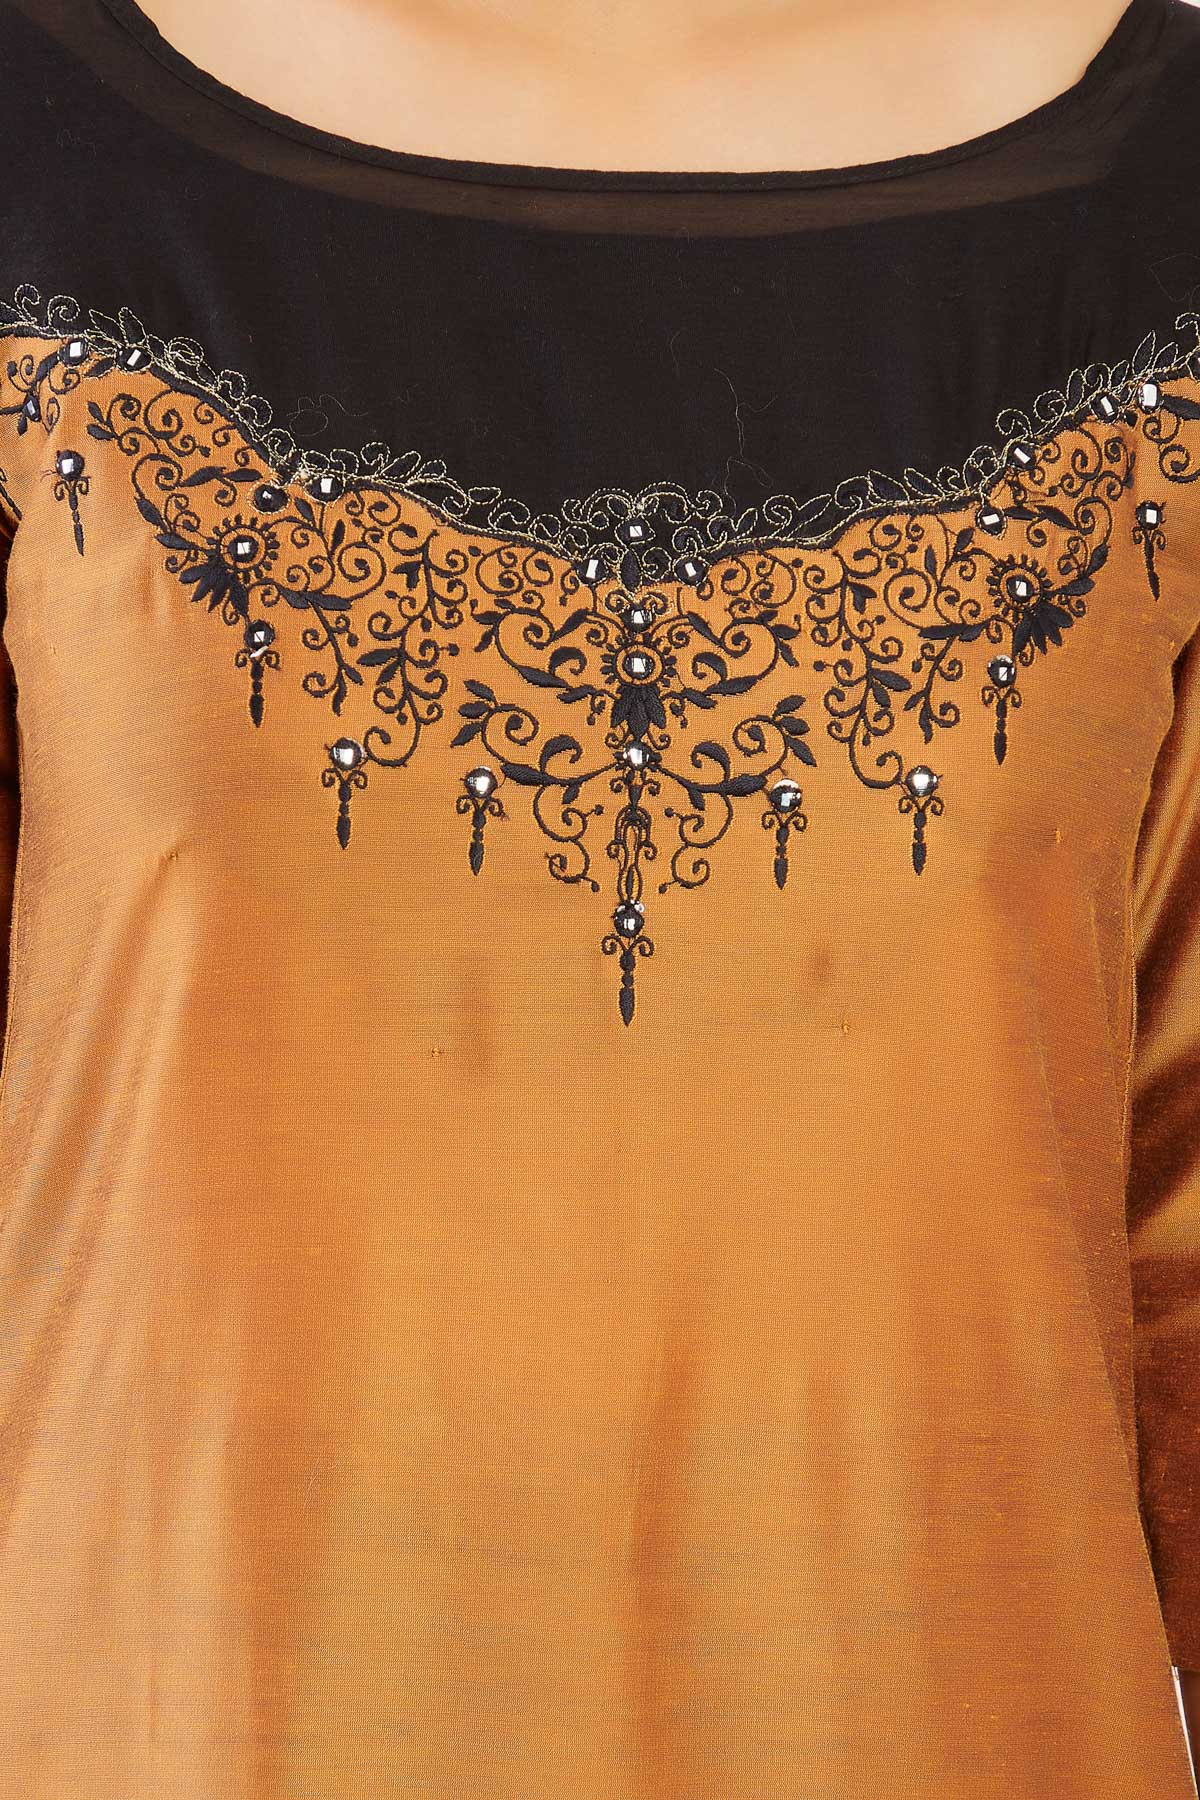 Contrast Double Layered Net with Vintage Floral Embroidered Sleeveless Kurta - Rust Orange